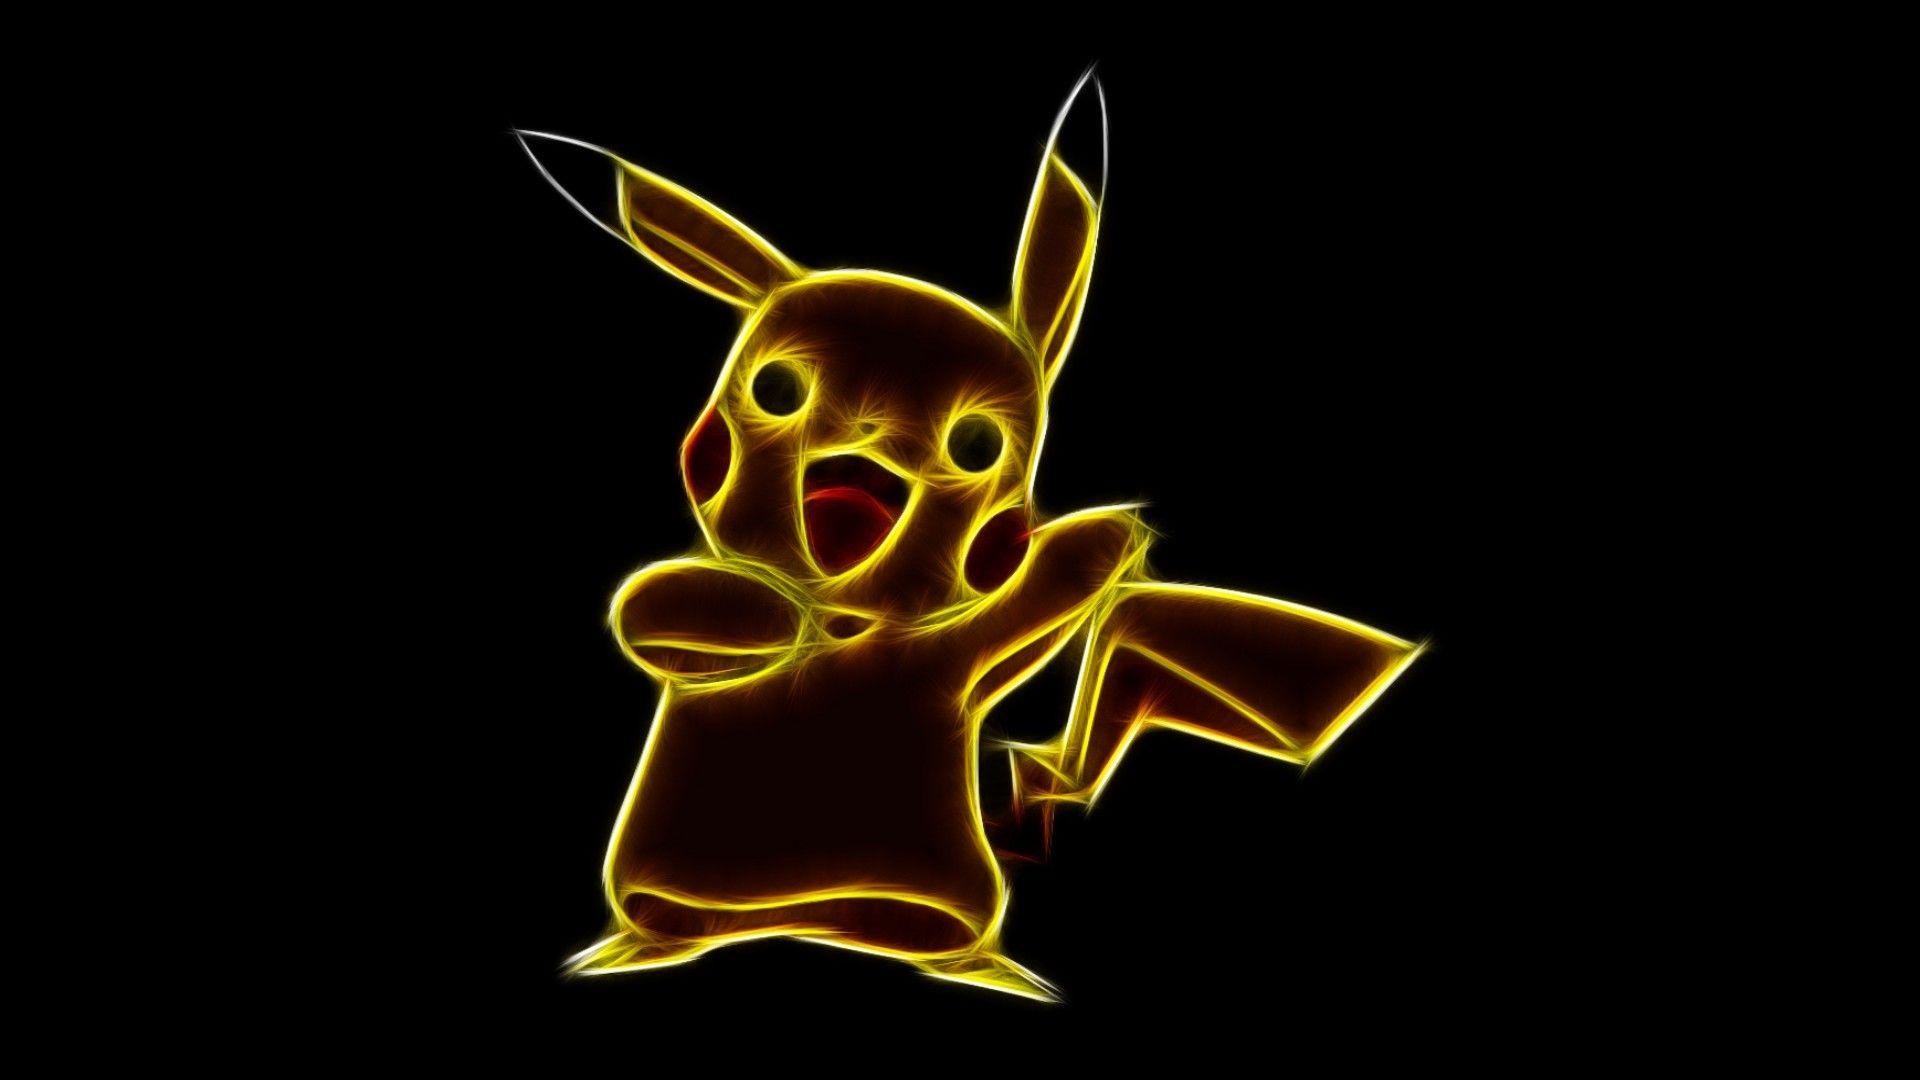 Cool Pikachu Wallpapers - Top Free Cool